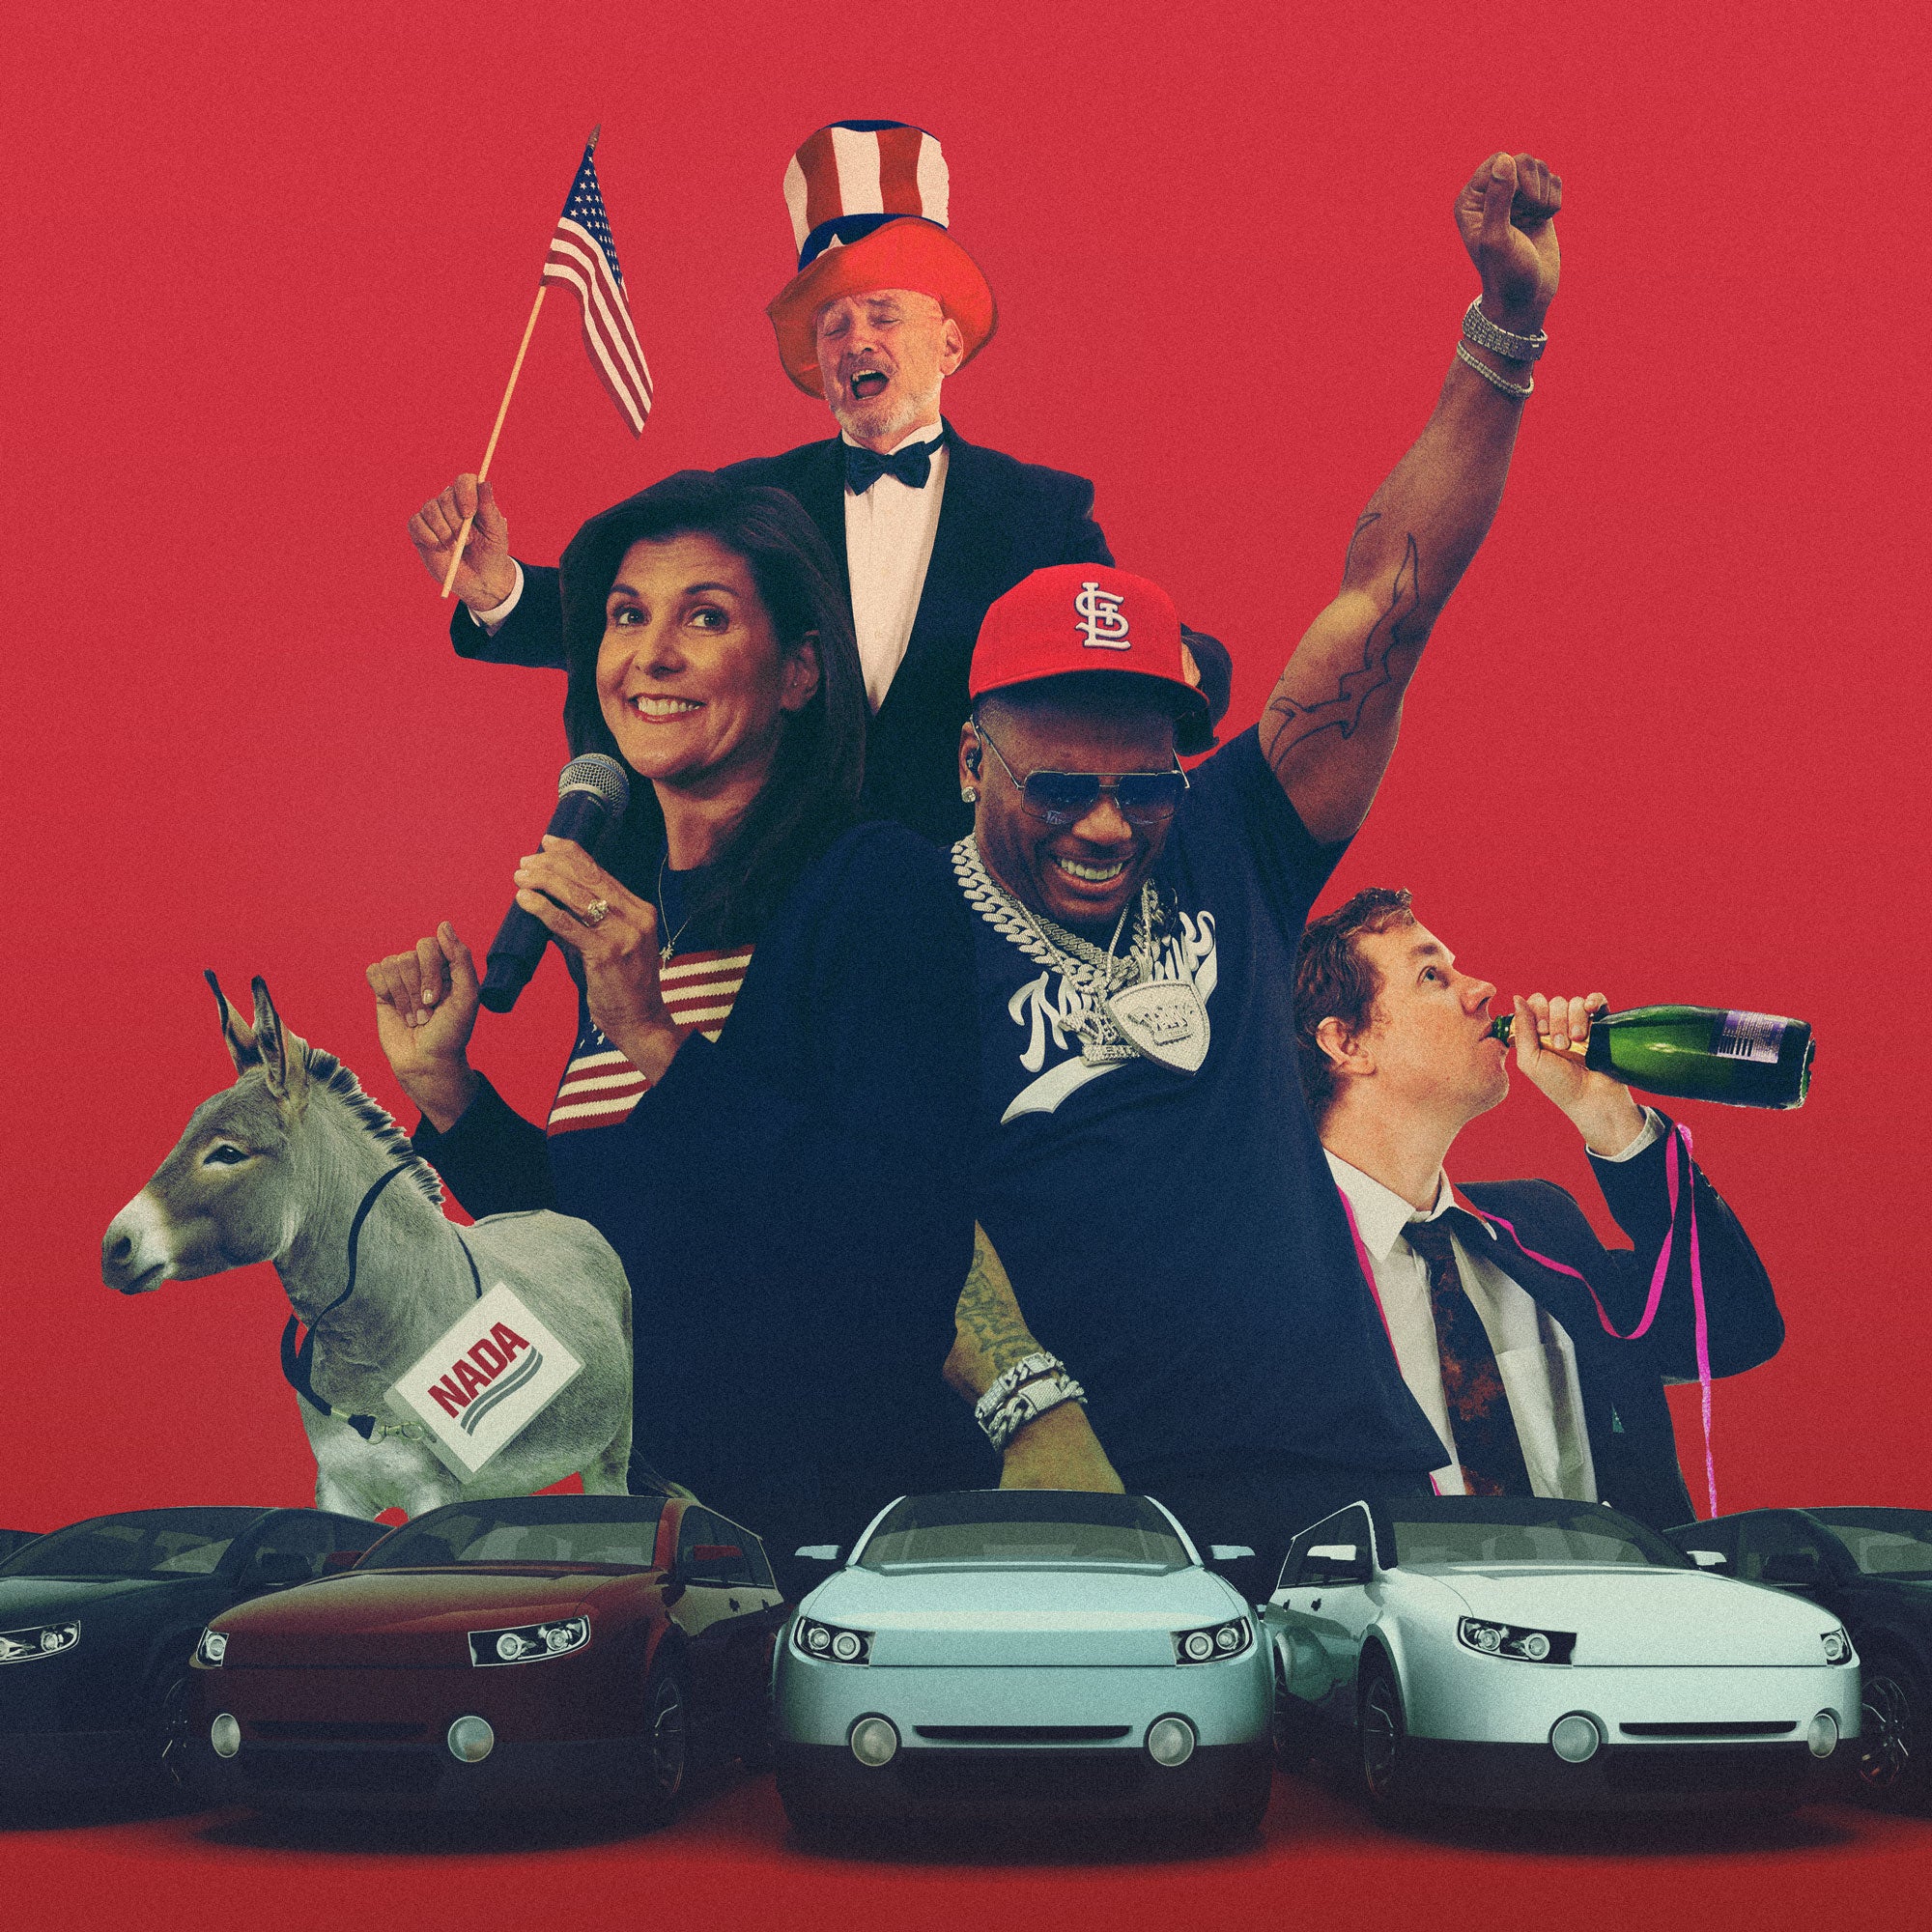 A collage of the NADA conference's most memorable characters, including Nelly, Nikki Haley, a drunk reveler, and the beer burro, atop a series of dealership cars.